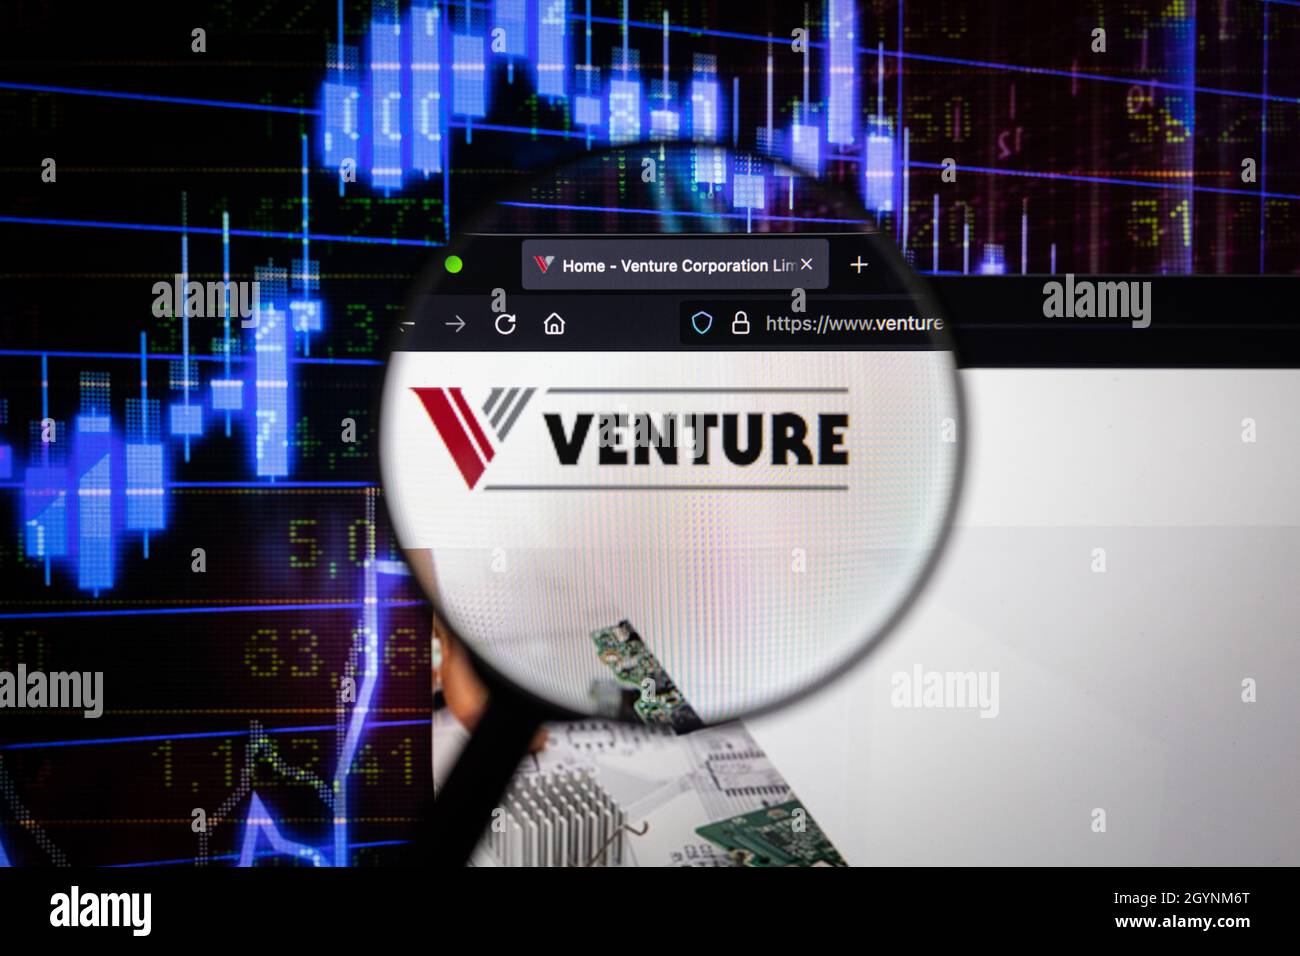 Venture company logo on a website with blurry stock market developments in the background, seen on a computer screen through a magnifying glass Stock Photo